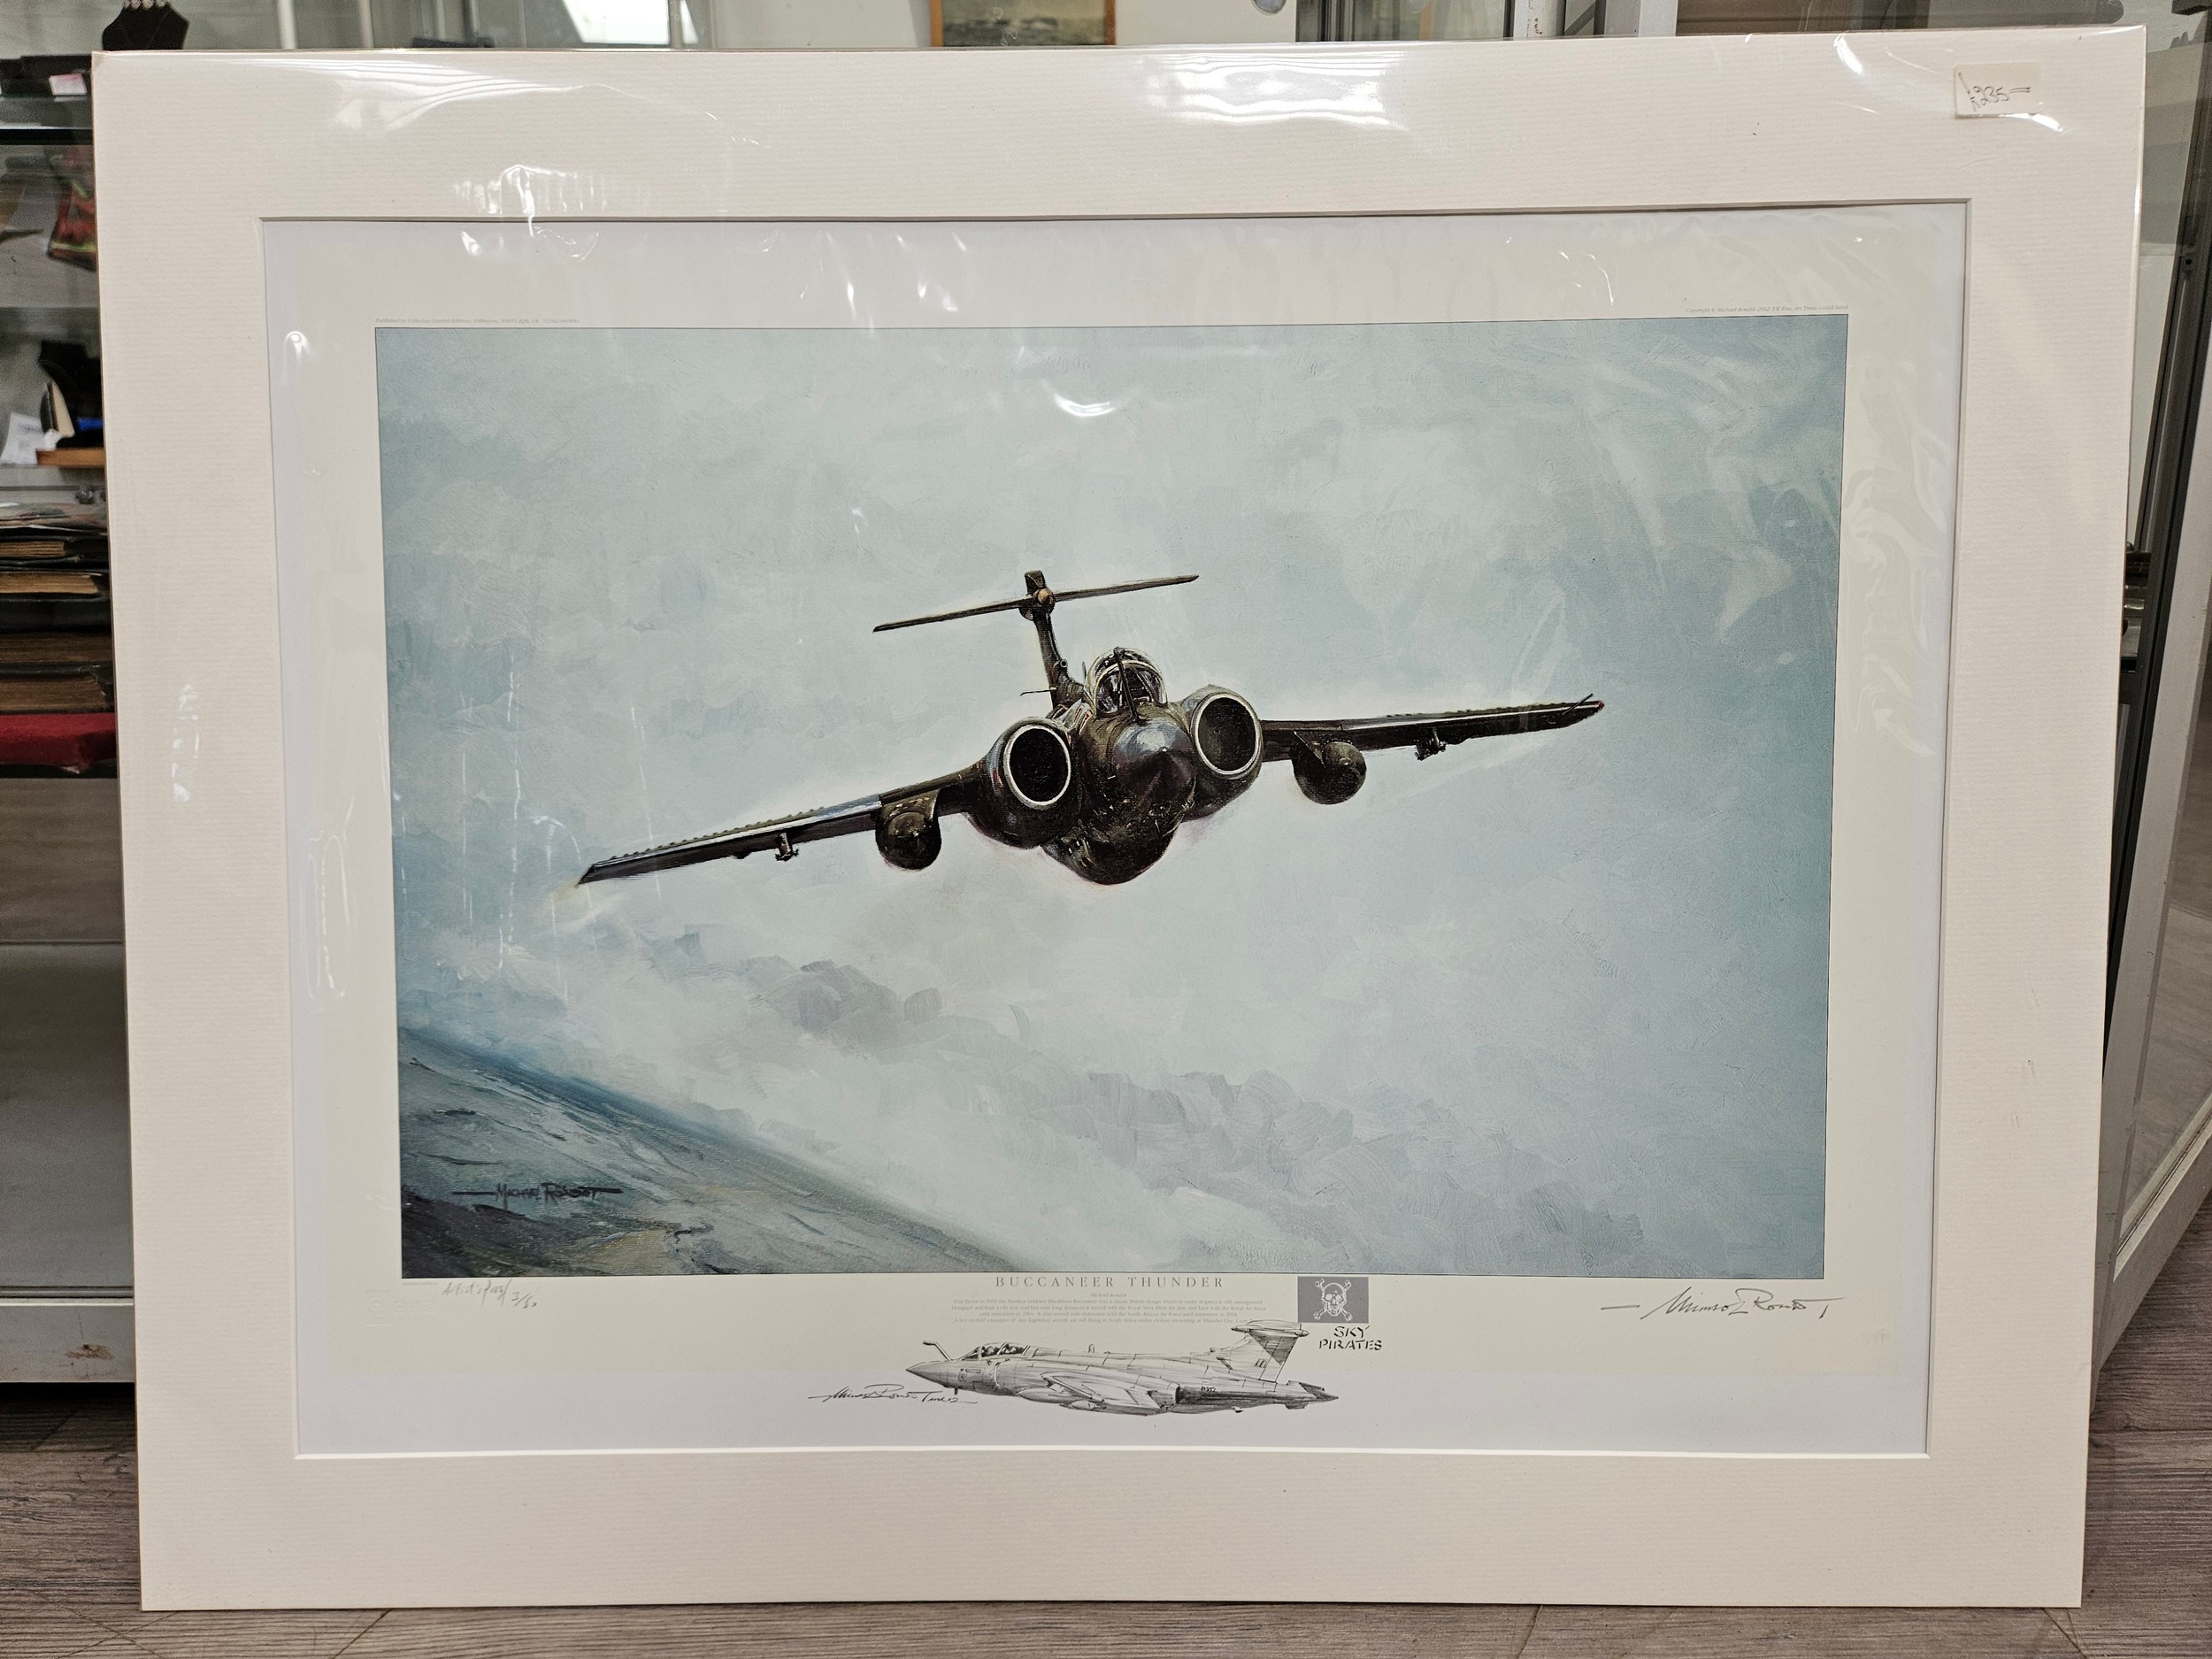 A Michael Rondot limited edition print “Buccaneer Thunder”, 3/50, sketch to margin